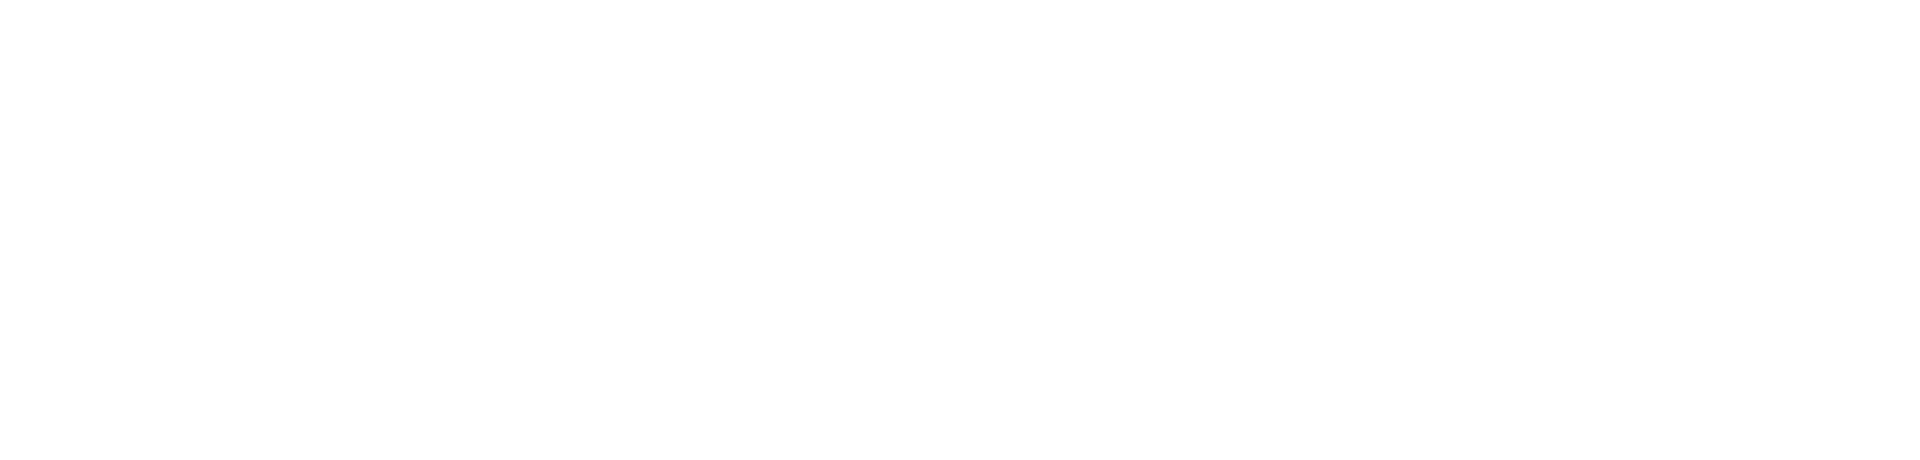 ProjectRecoil